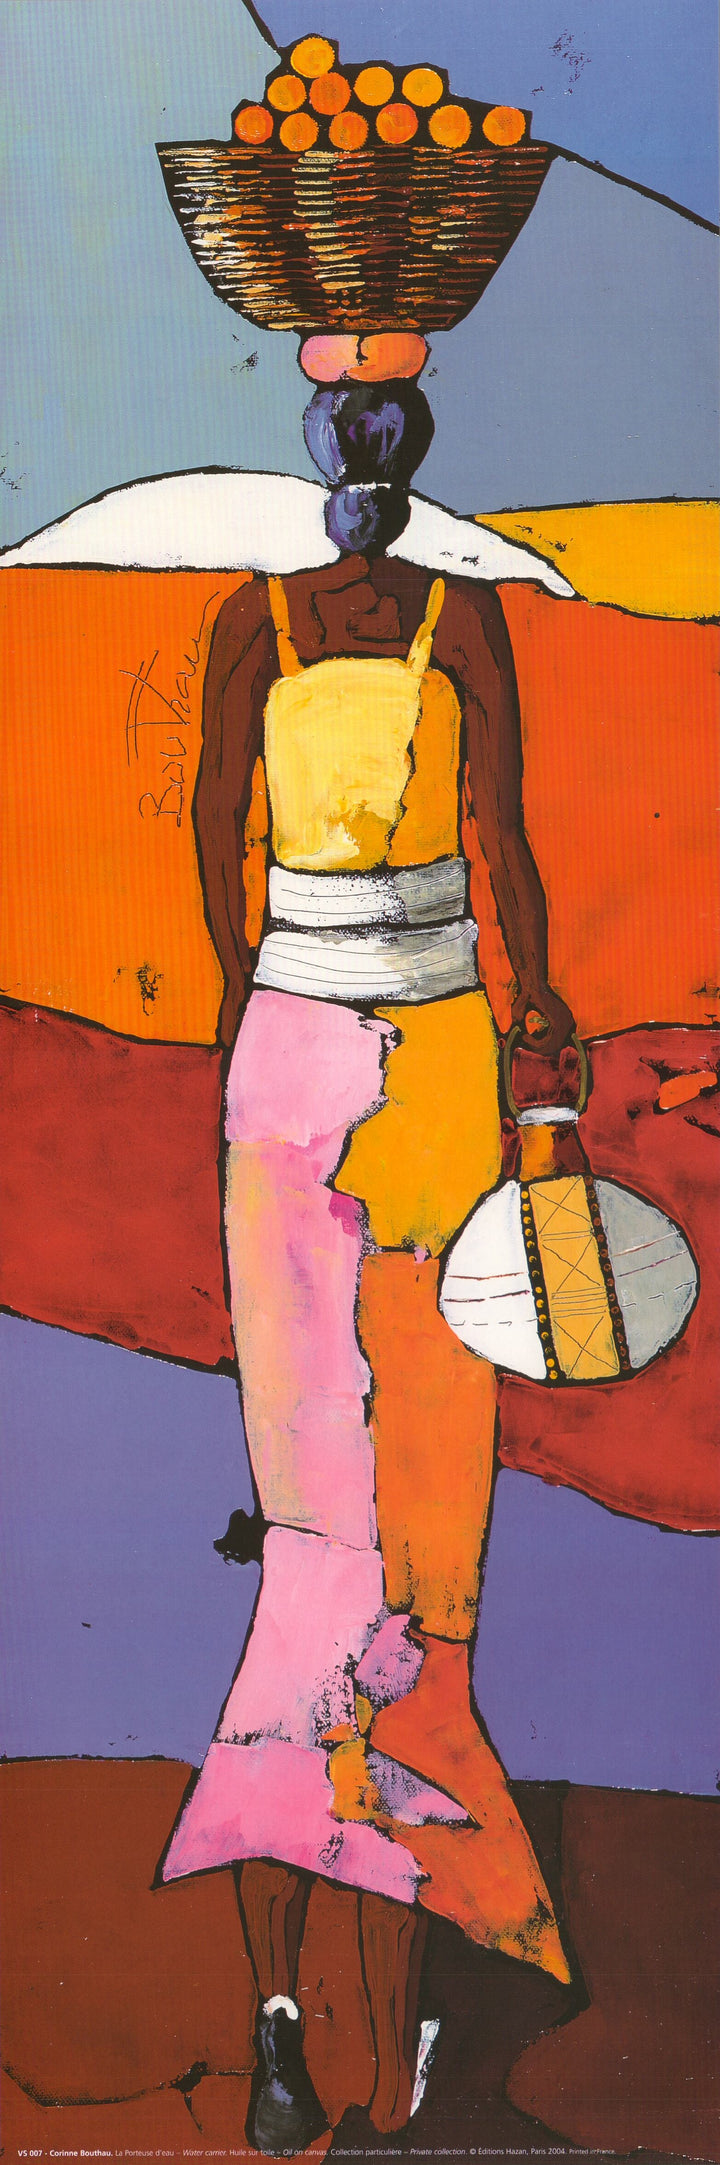 Water Carrier by Corinne Bouthau - 8 X 24 Inches (Art Print)